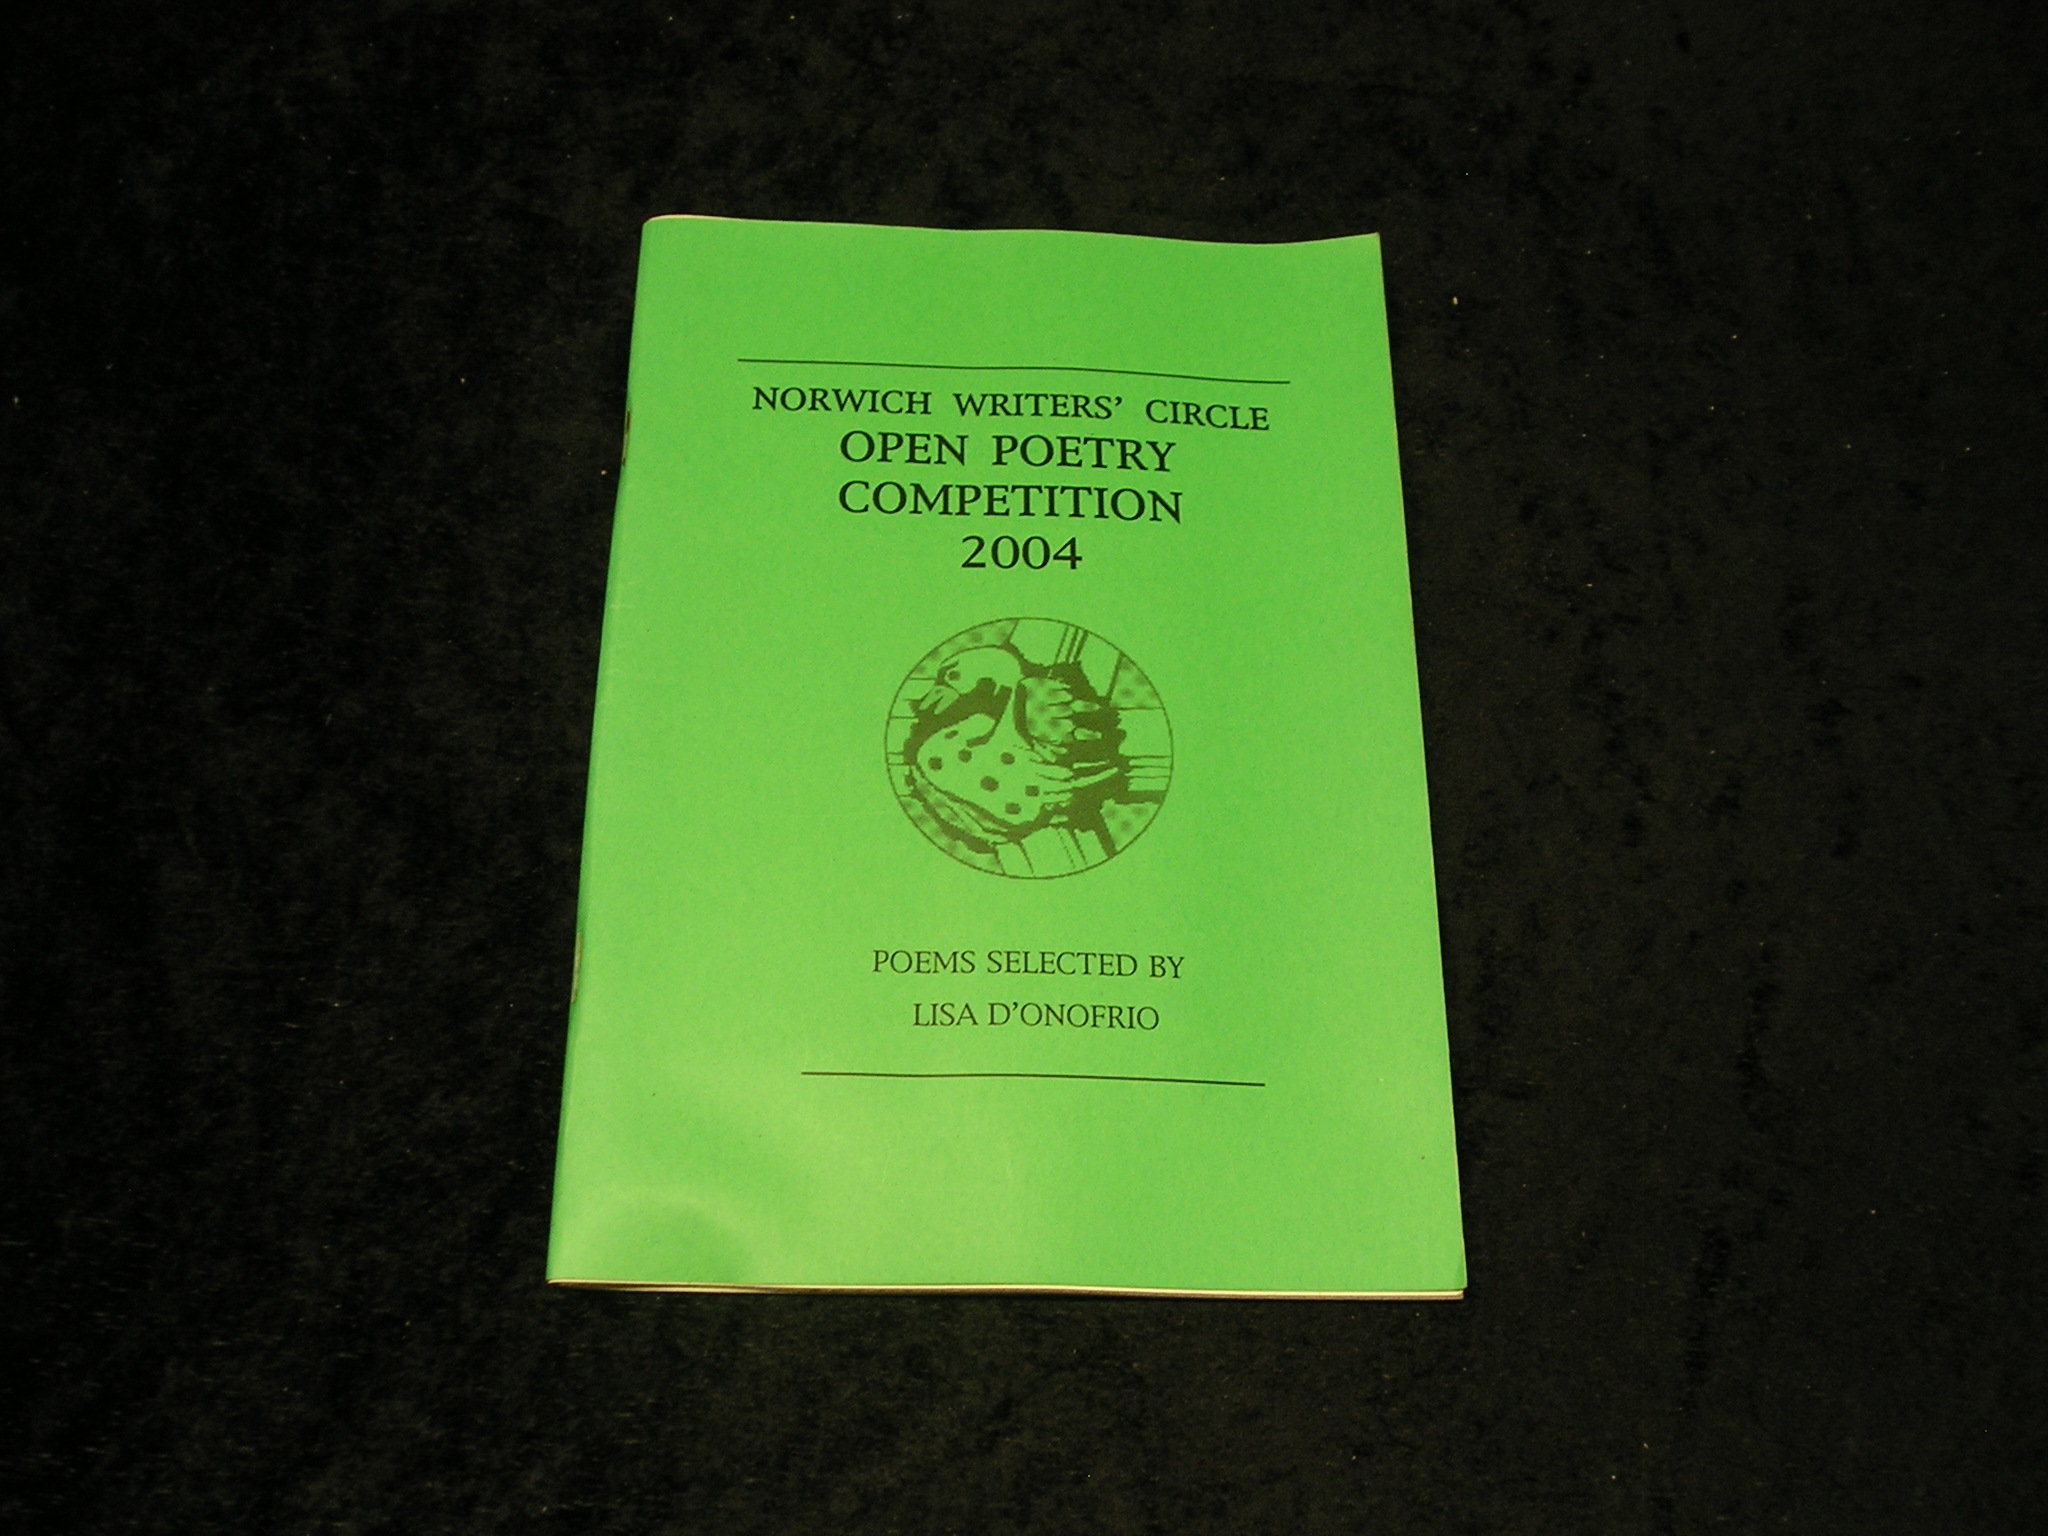 Norwich Writers' Circle Open Poetry Competition 2004